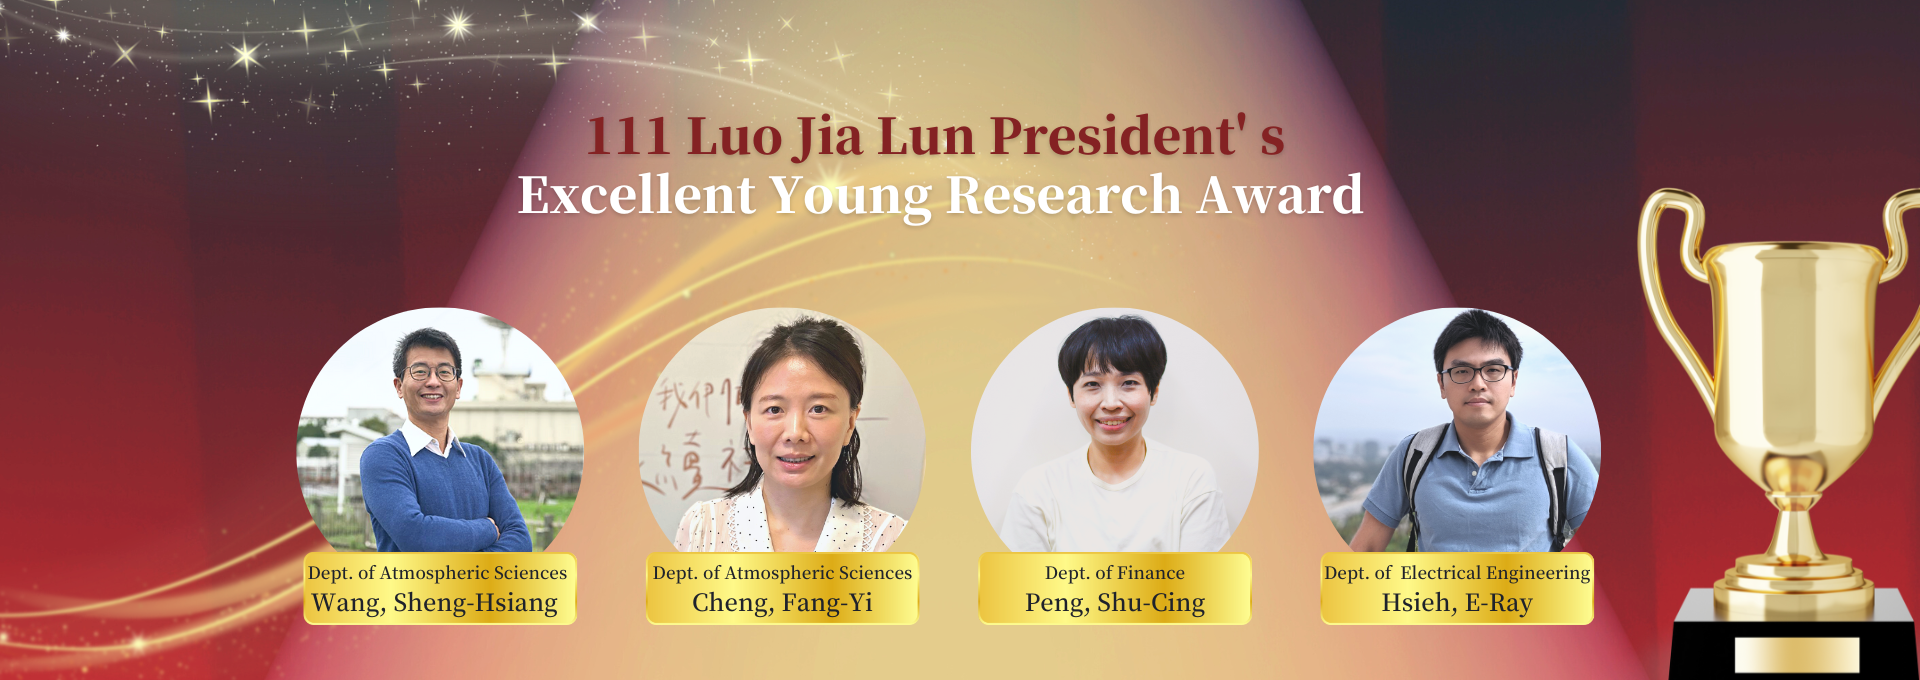 111 Luo Jia Lun President's Excellent Young Research Award